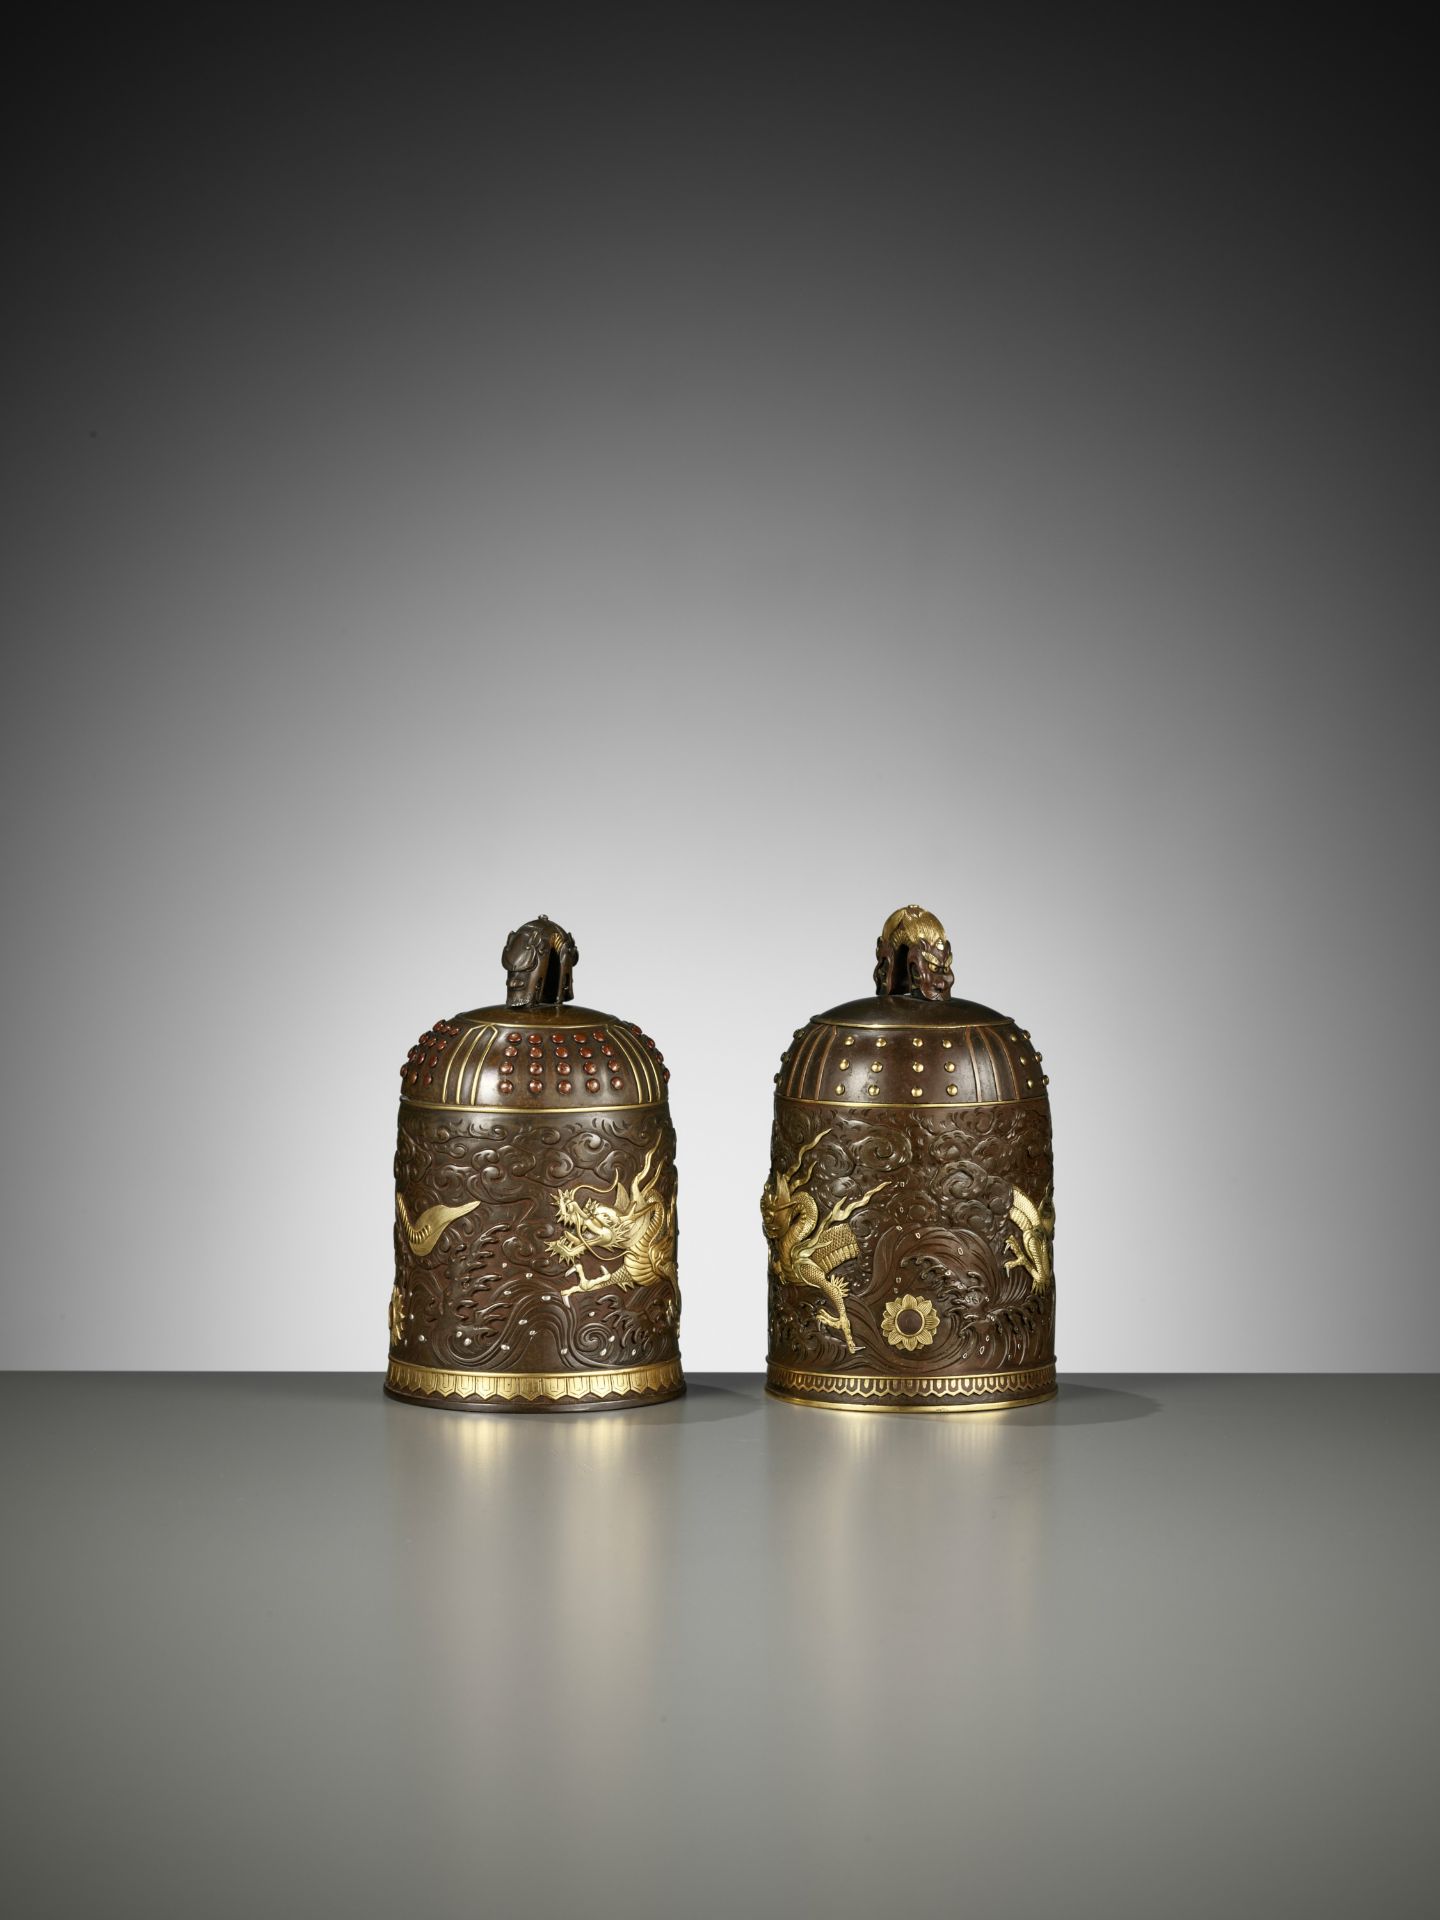 A MATCHED PAIR OF GOLD-INLAID BRONZE 'BUDDHIST TEMPLE BELL' KOGO, ONE BY MIYABE ATSUYOSHI - Image 4 of 15